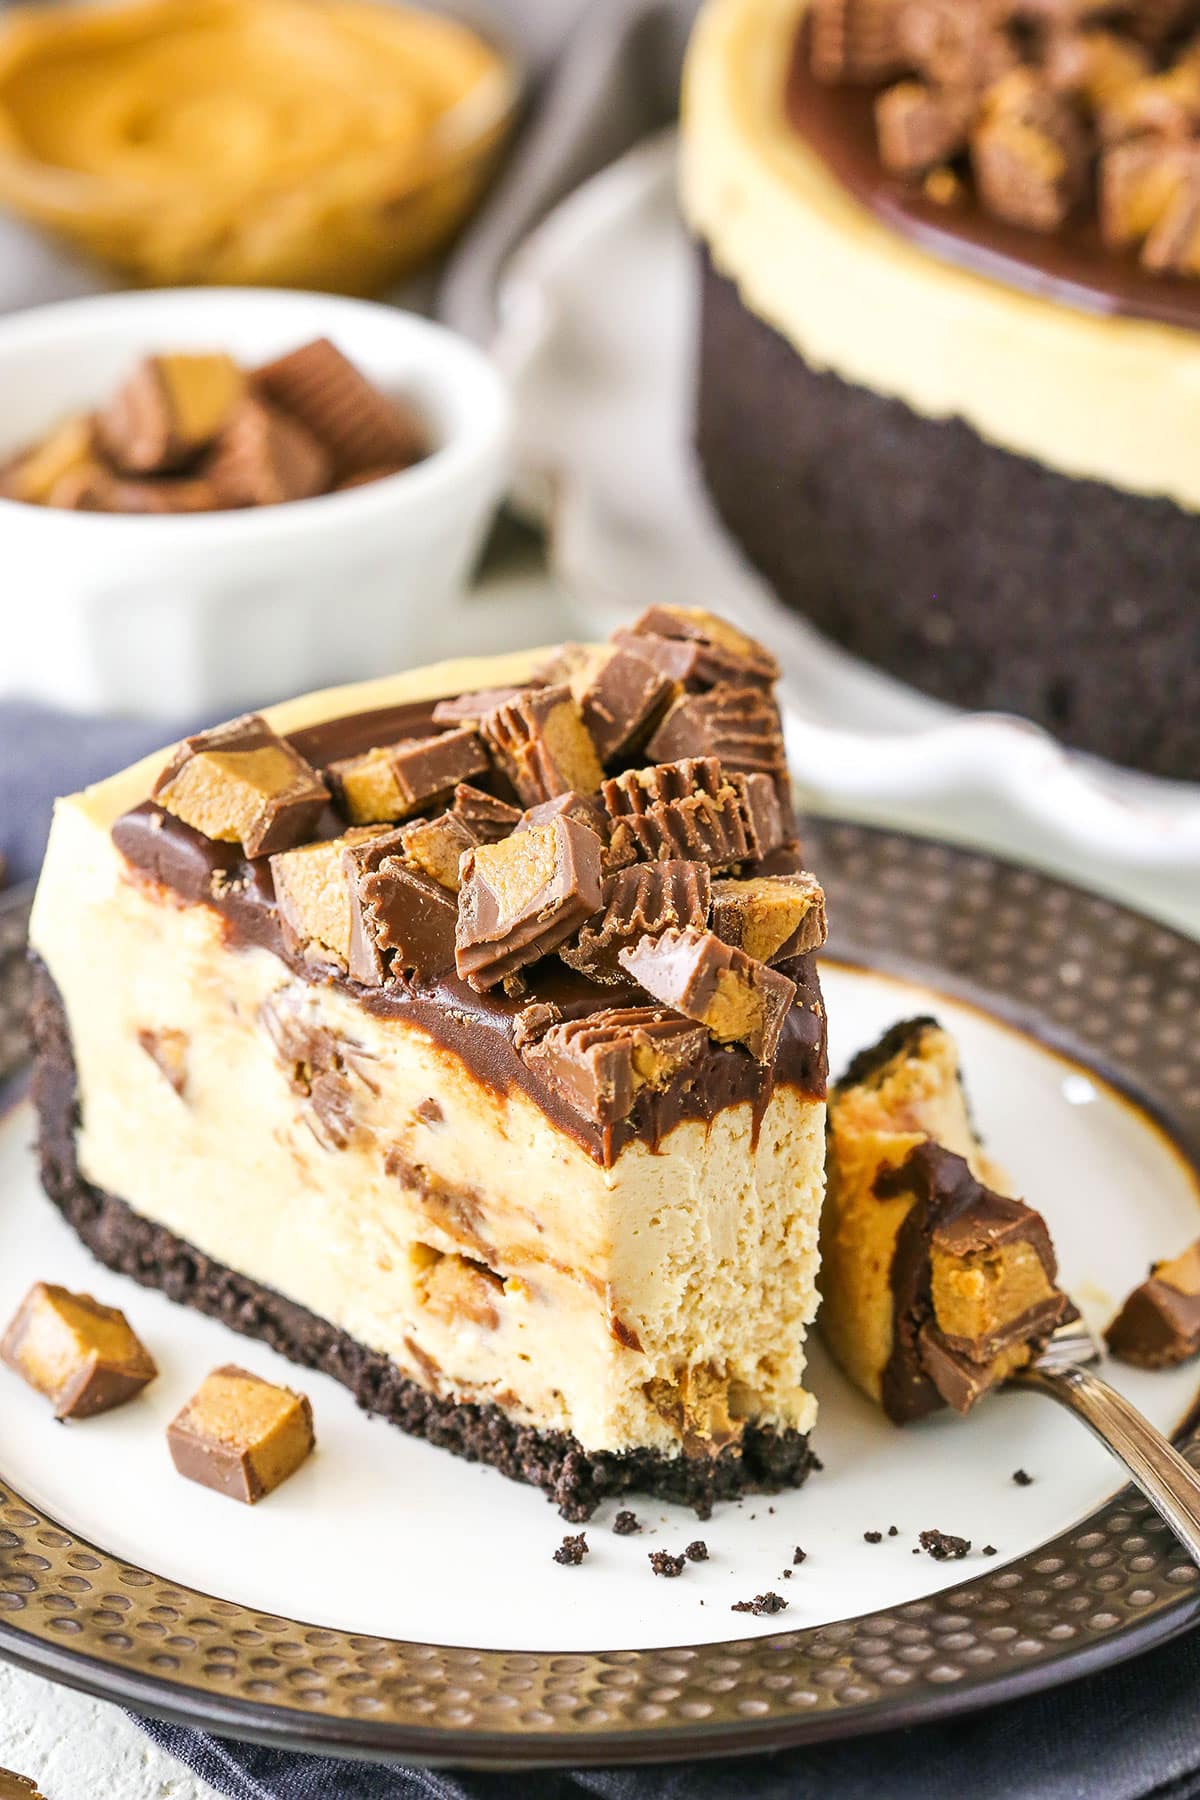 A slice of No Bake Reese's Peanut Butter Cheesecake with a bite taken out with a fork on a white and grey plate